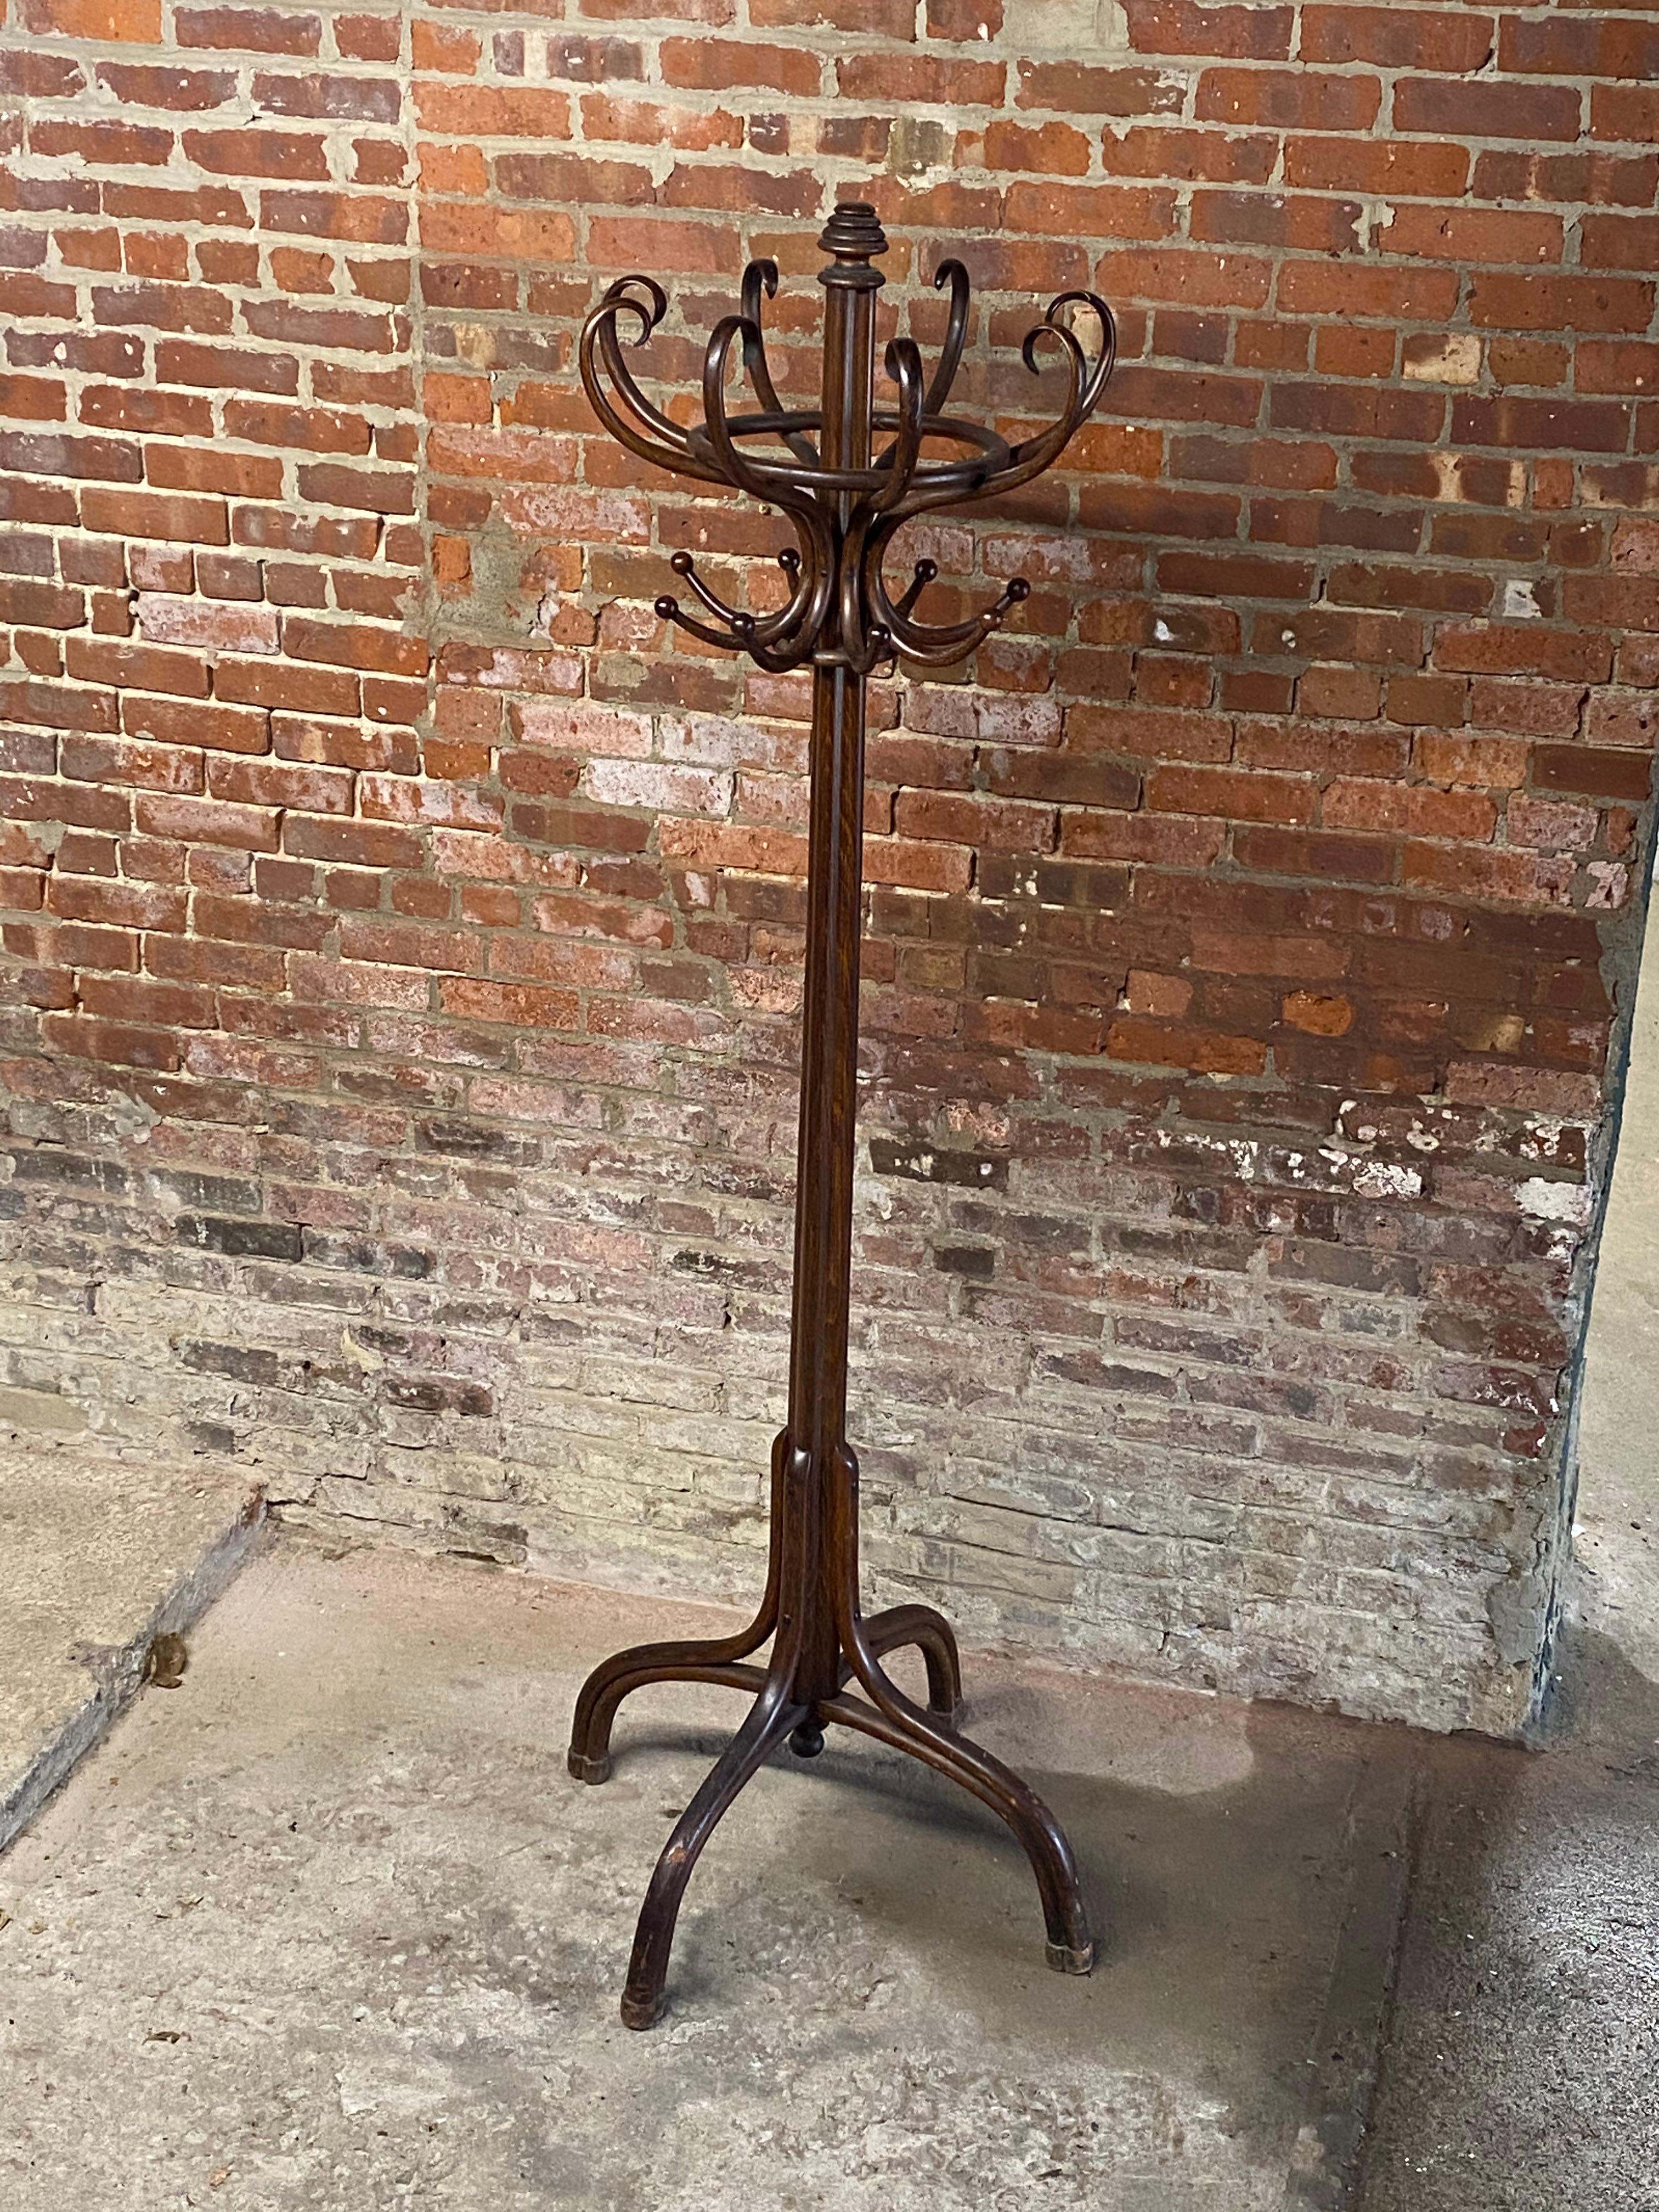 Dramatic and beautiful Thonet bentwood hall tree. Michael Thonet's innovative design and manipulation of wood through heat, moisture and pressure bending the wood into marvelous shapes and forms. Usually Thonet used Ash or Beech for his much coveted